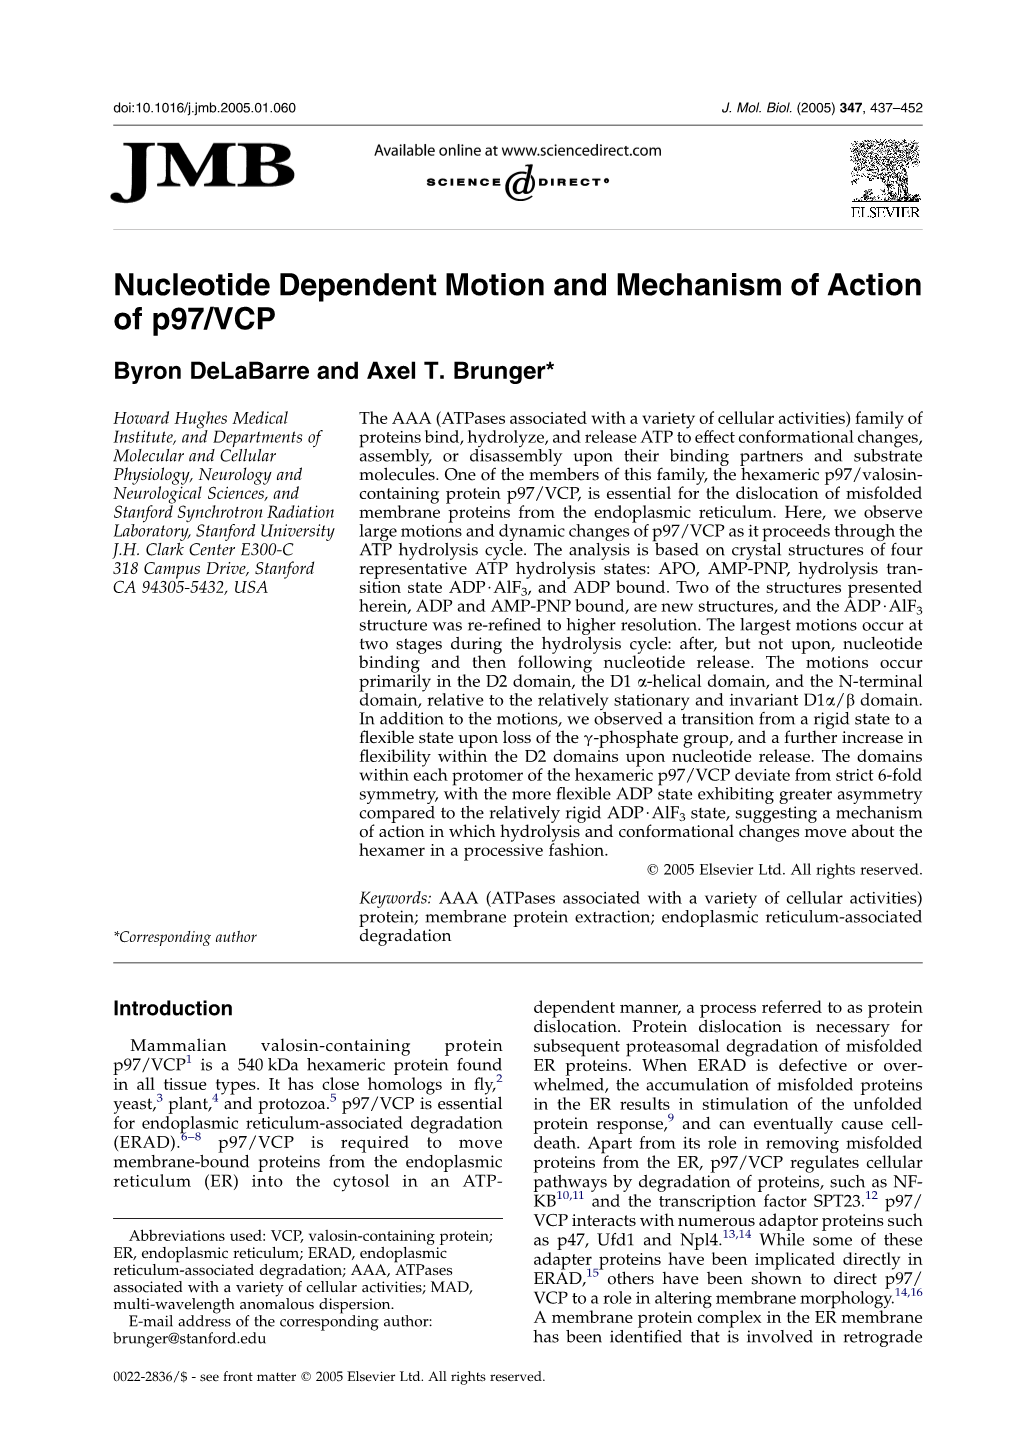 Nucleotide Dependent Motion and Mechanism of Action of P97/VCP